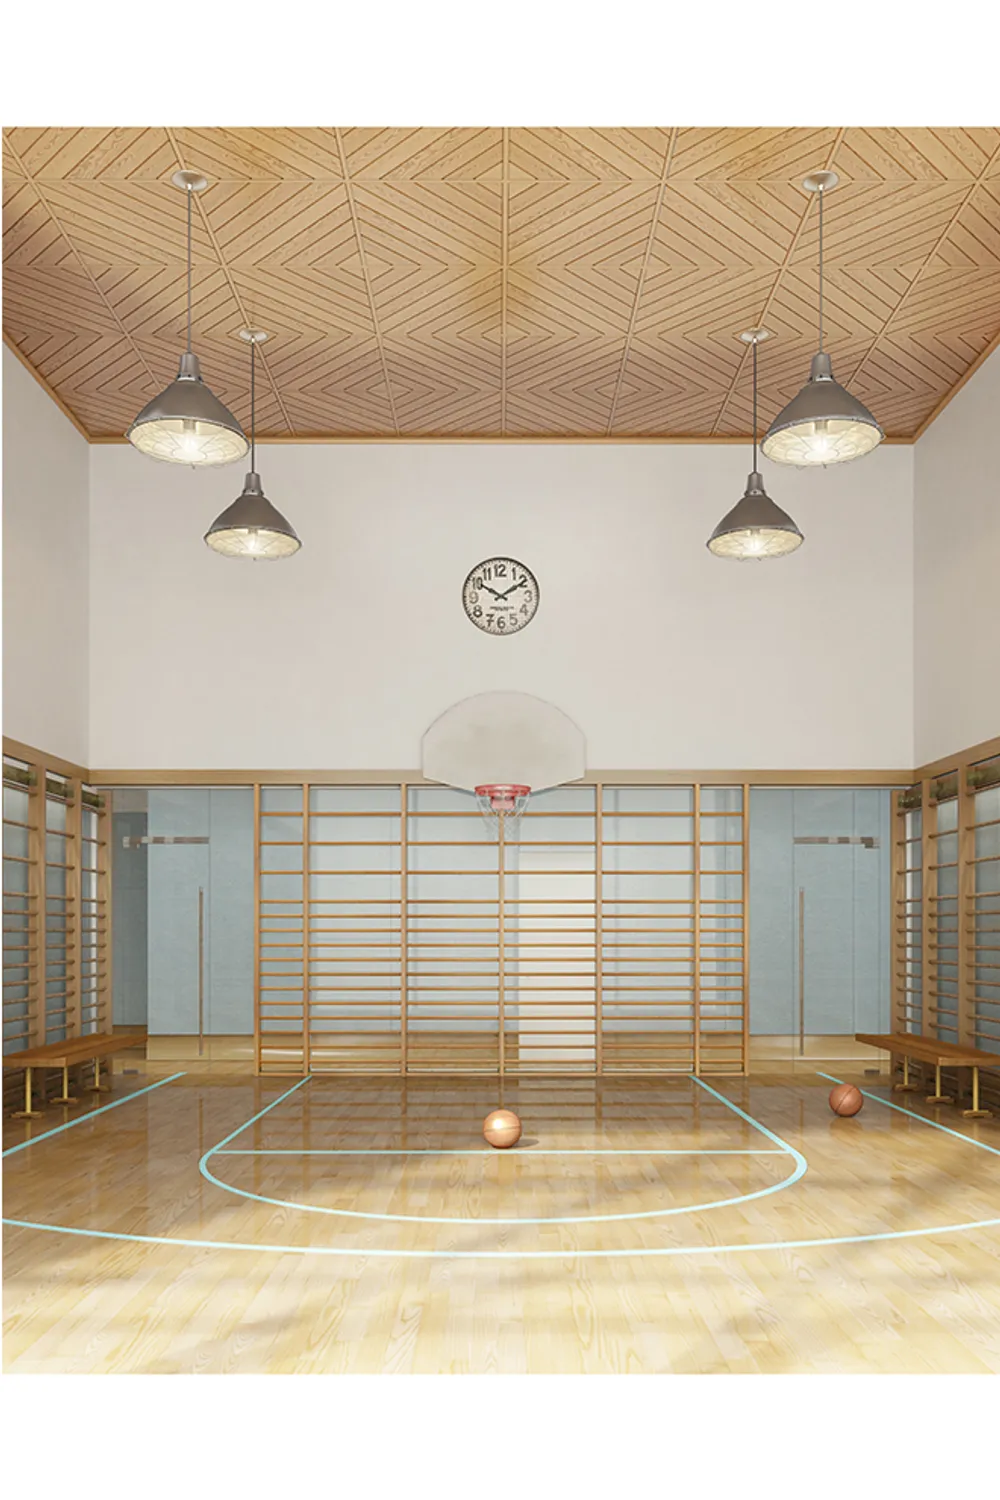 Double height basketball court